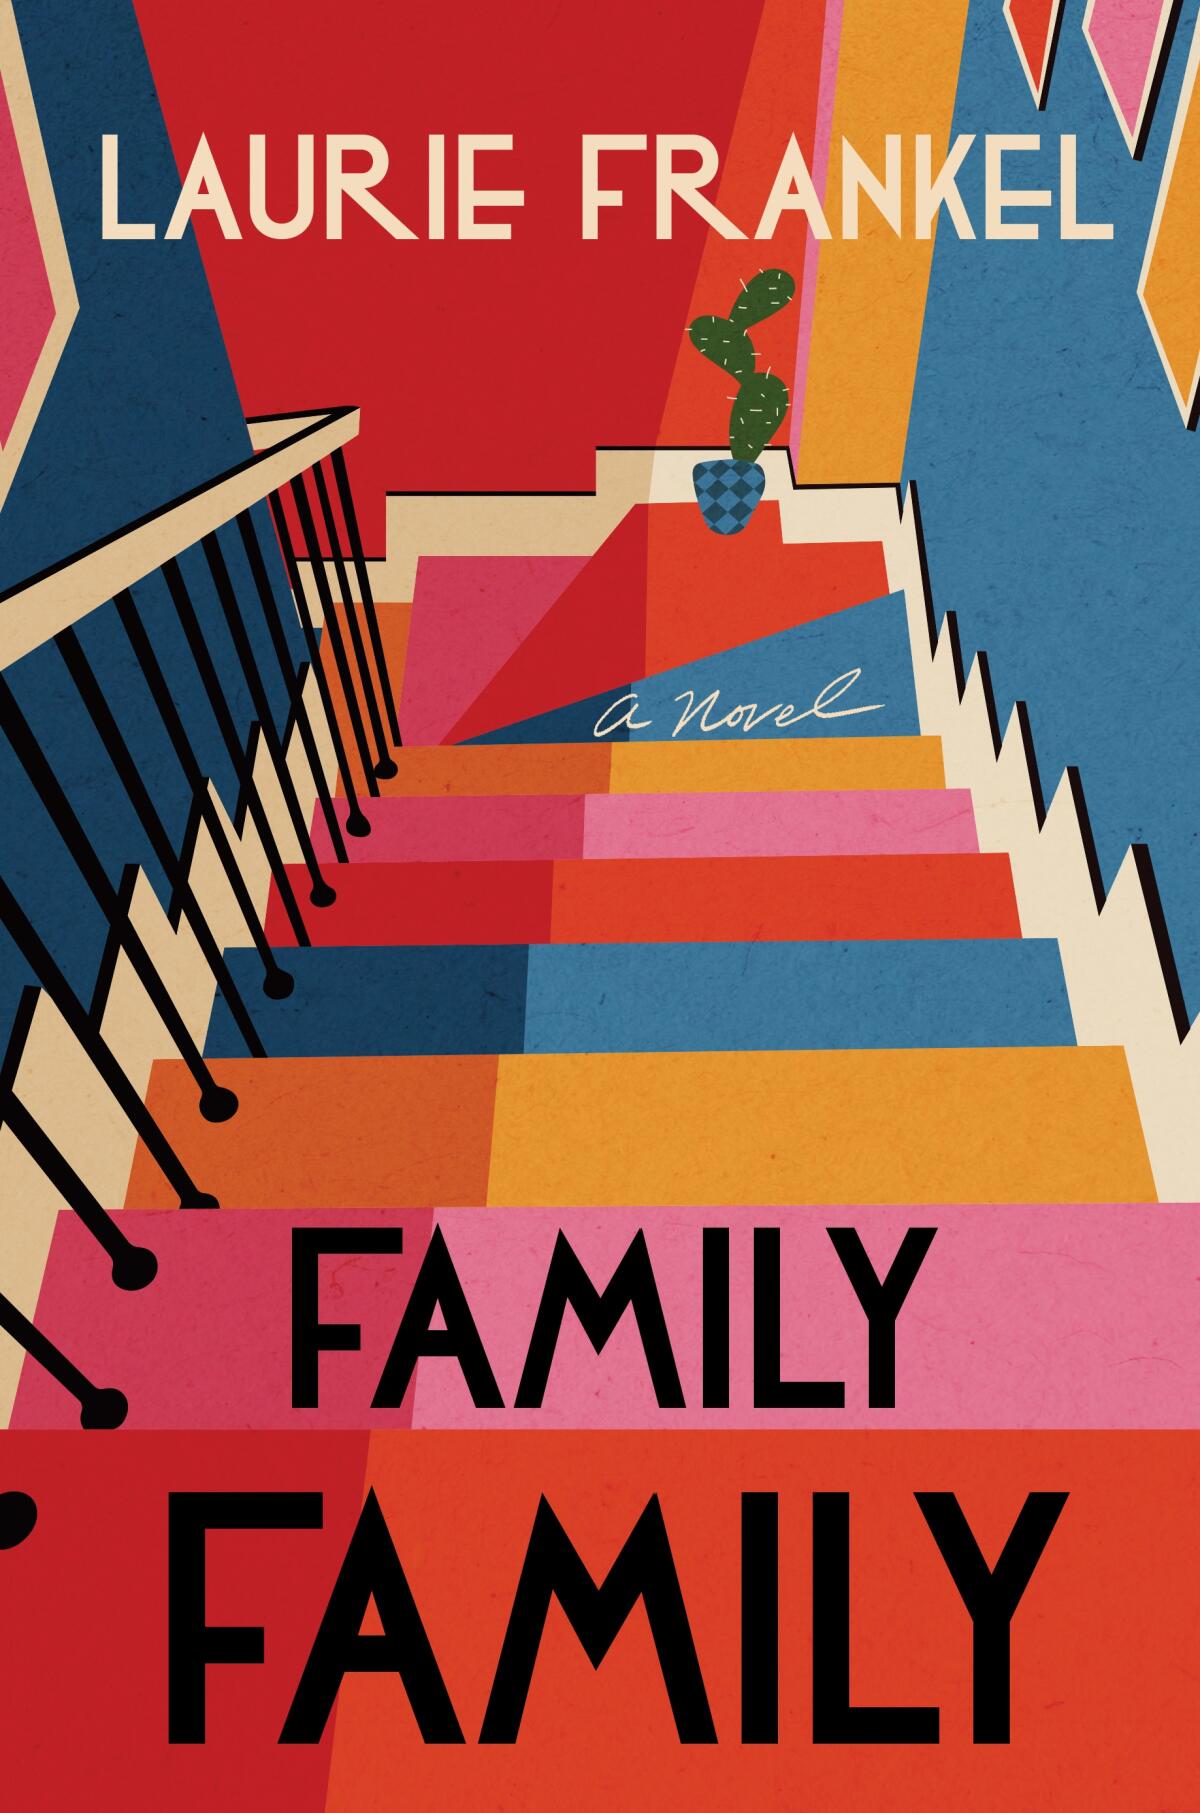 The colorful cover of "Family Family," by Laurie Frankel, is a view down a curving staircase in a house.